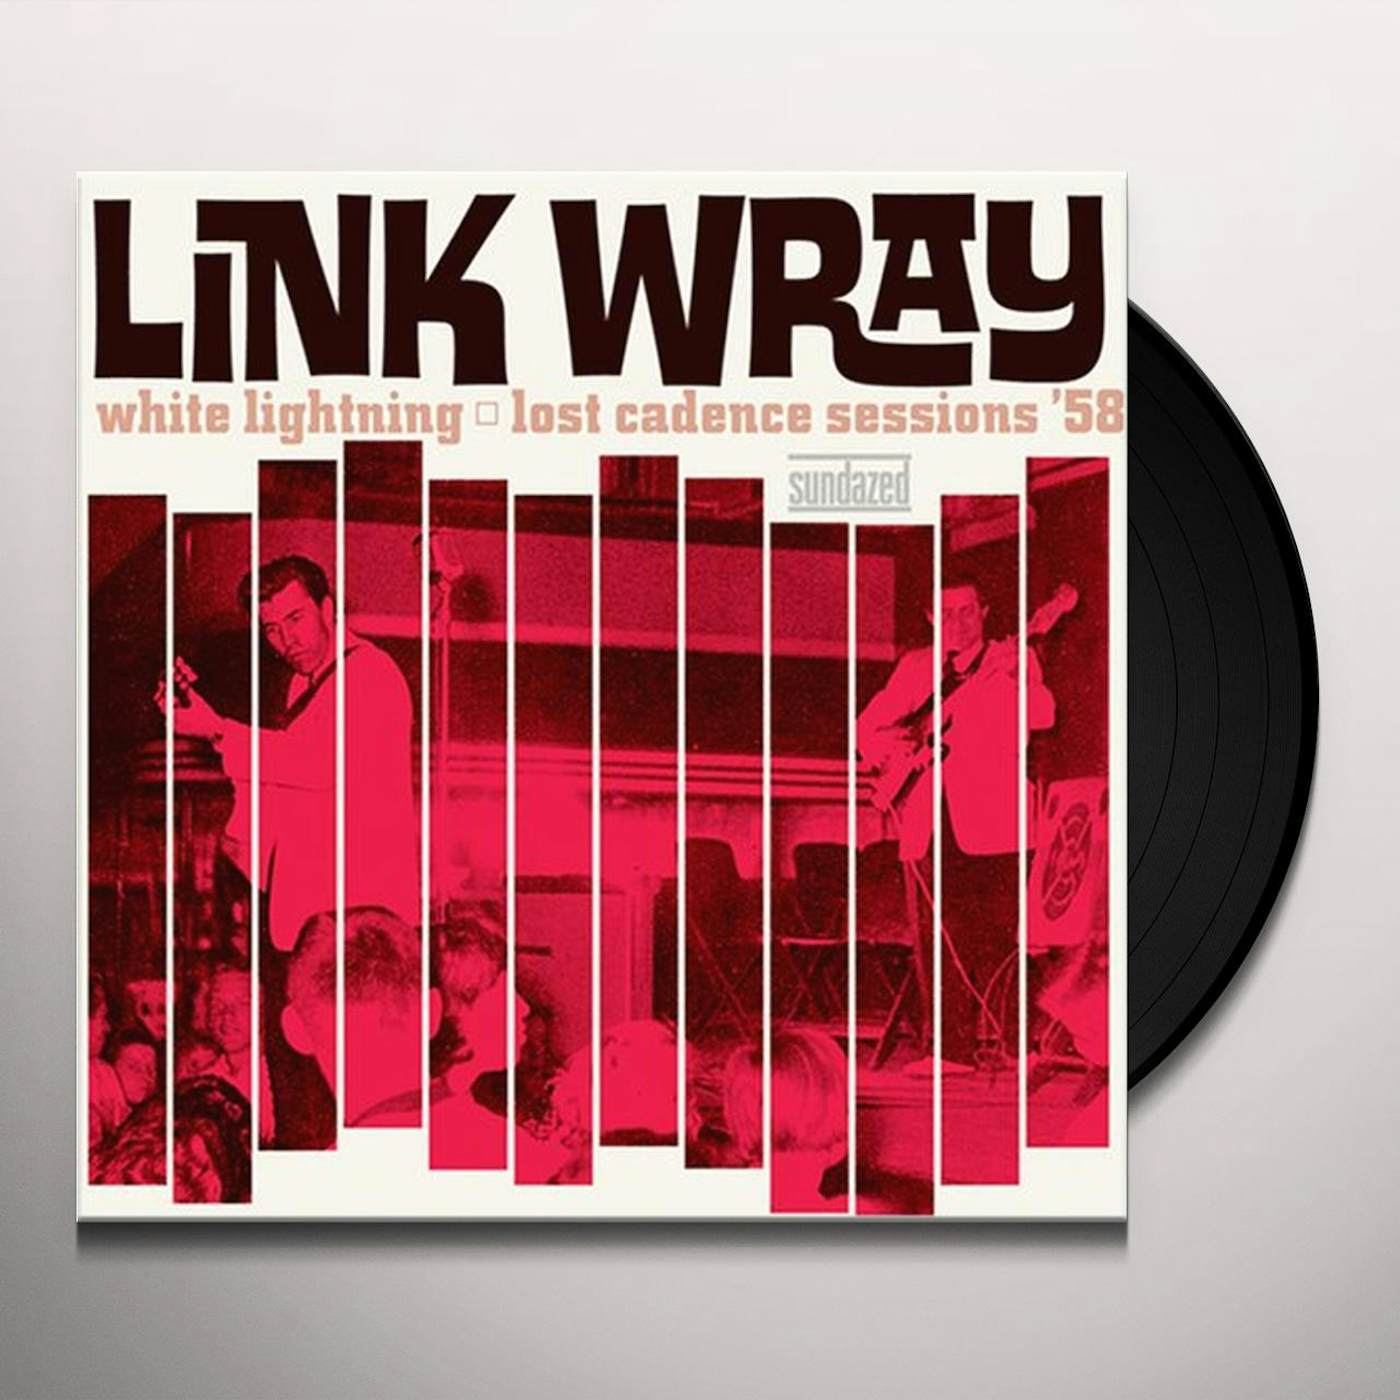 Link Wray WHITE LIGHTNING: LOST CADENCE SESSIONS 58 Vinyl Record